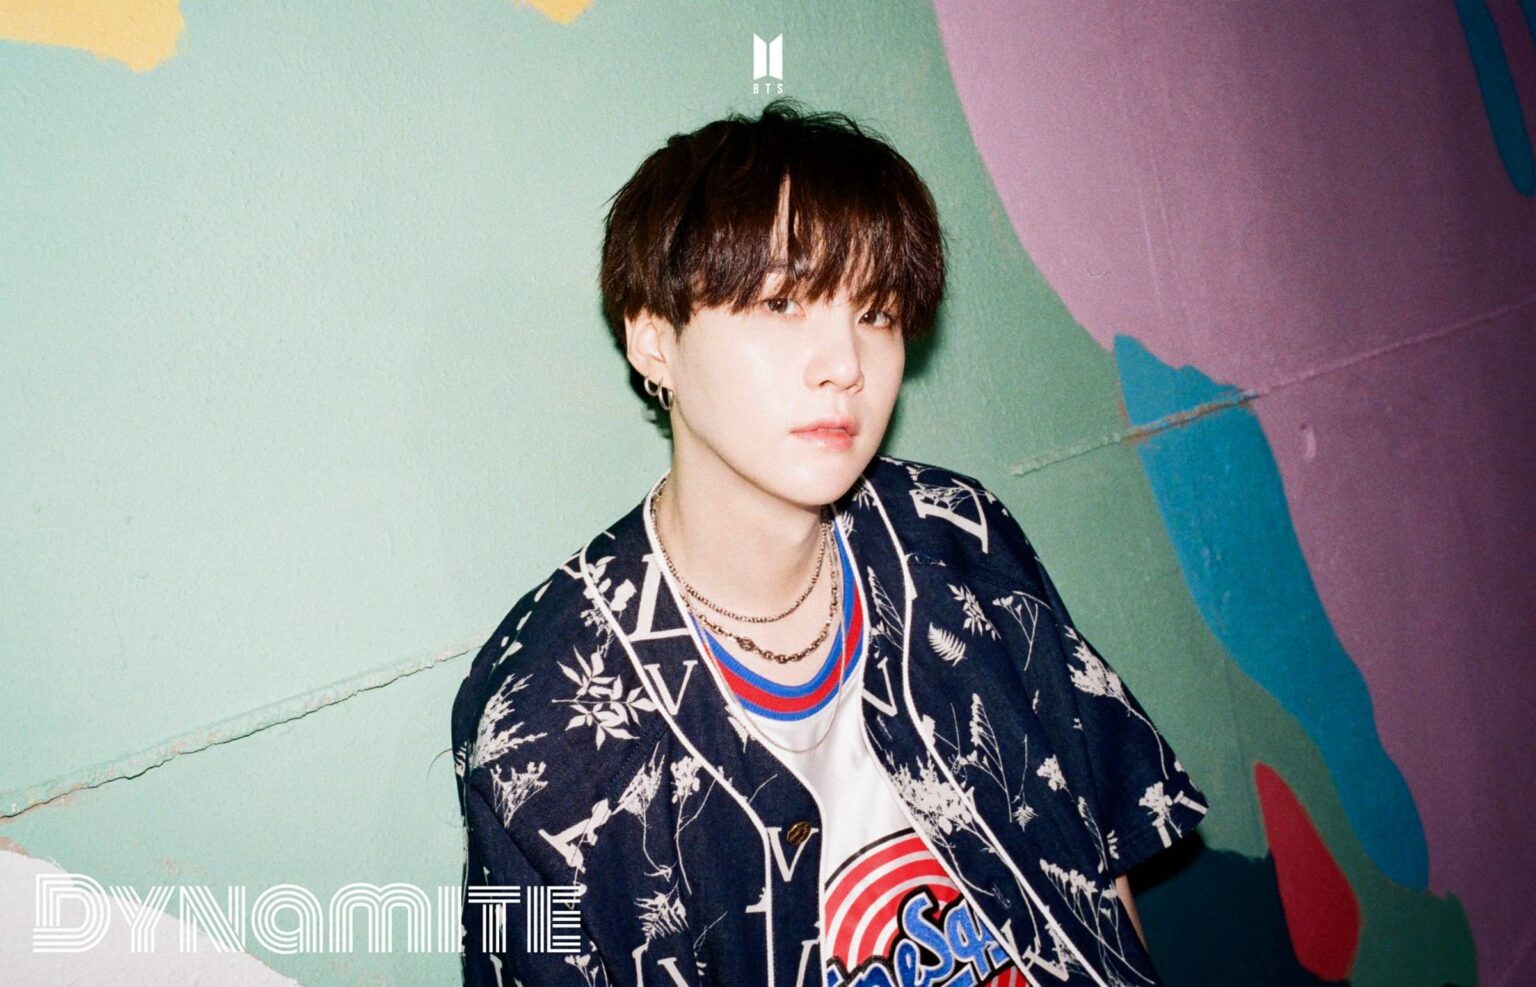 Suga is a prolific songwriter and has done a lot for BTS. Here's what his creative process looks like when writing a song.